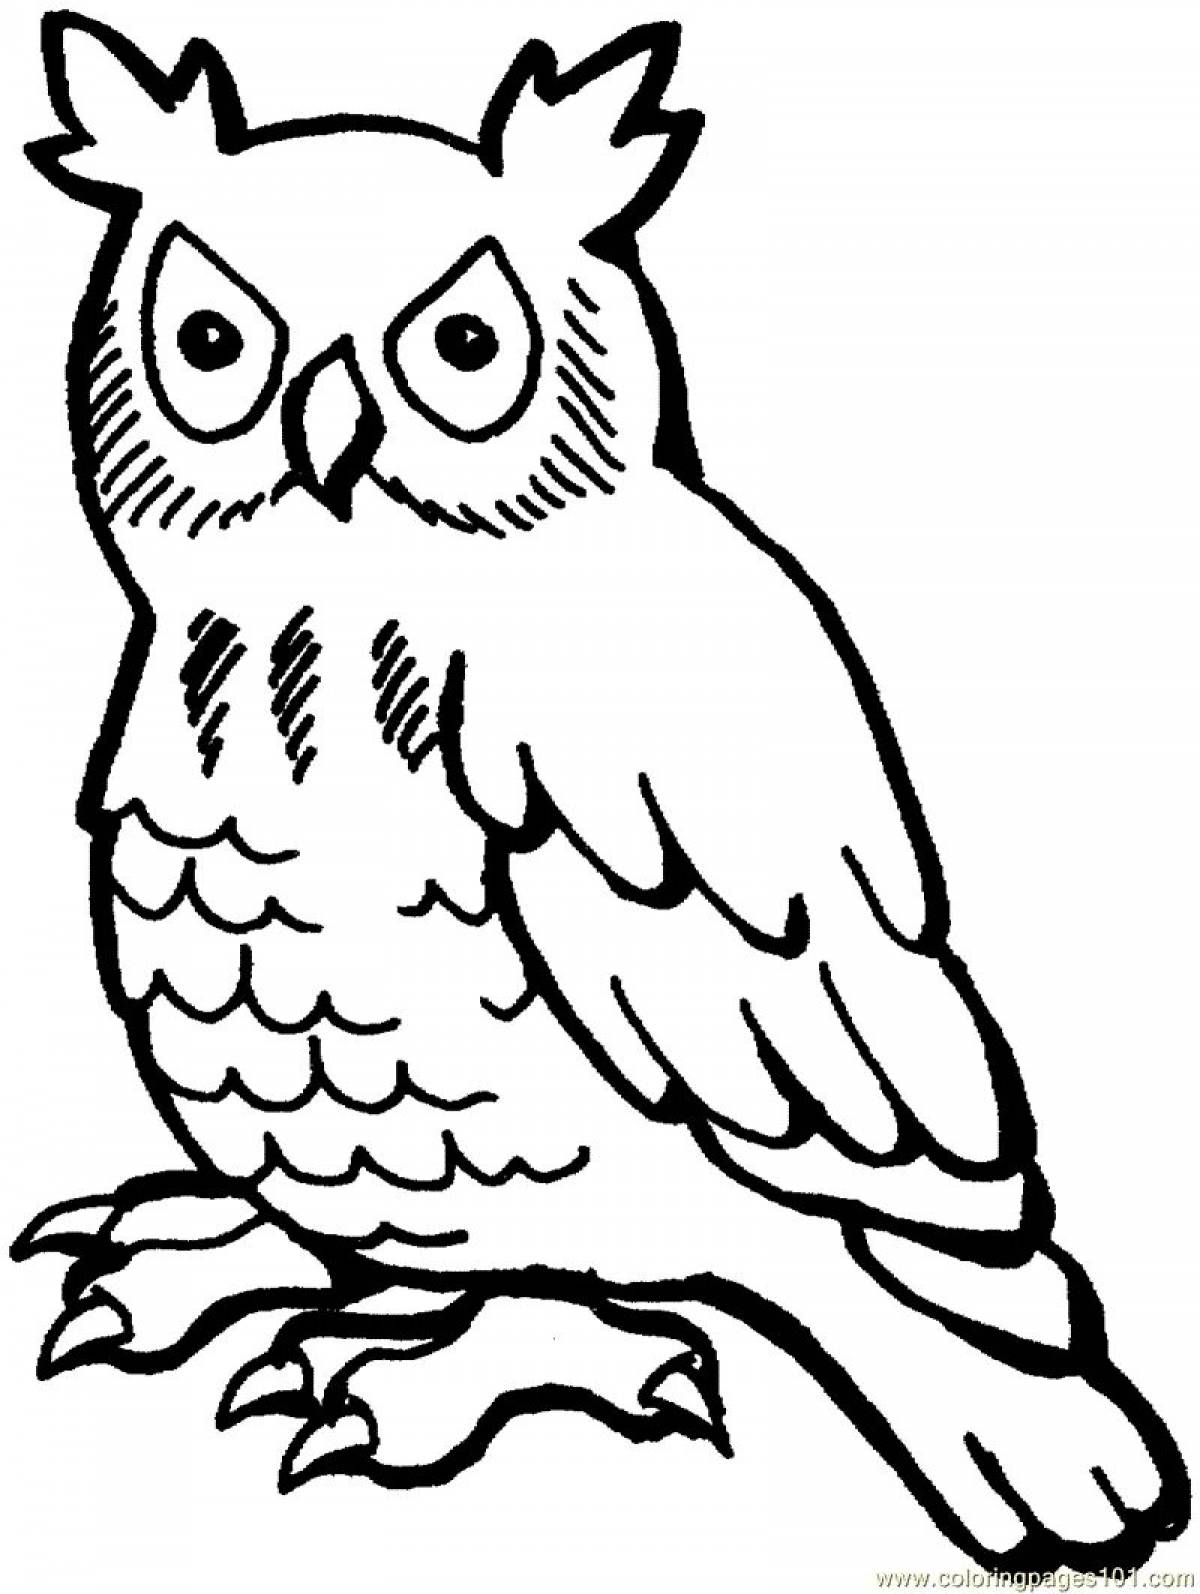 Owl picture for kids #6